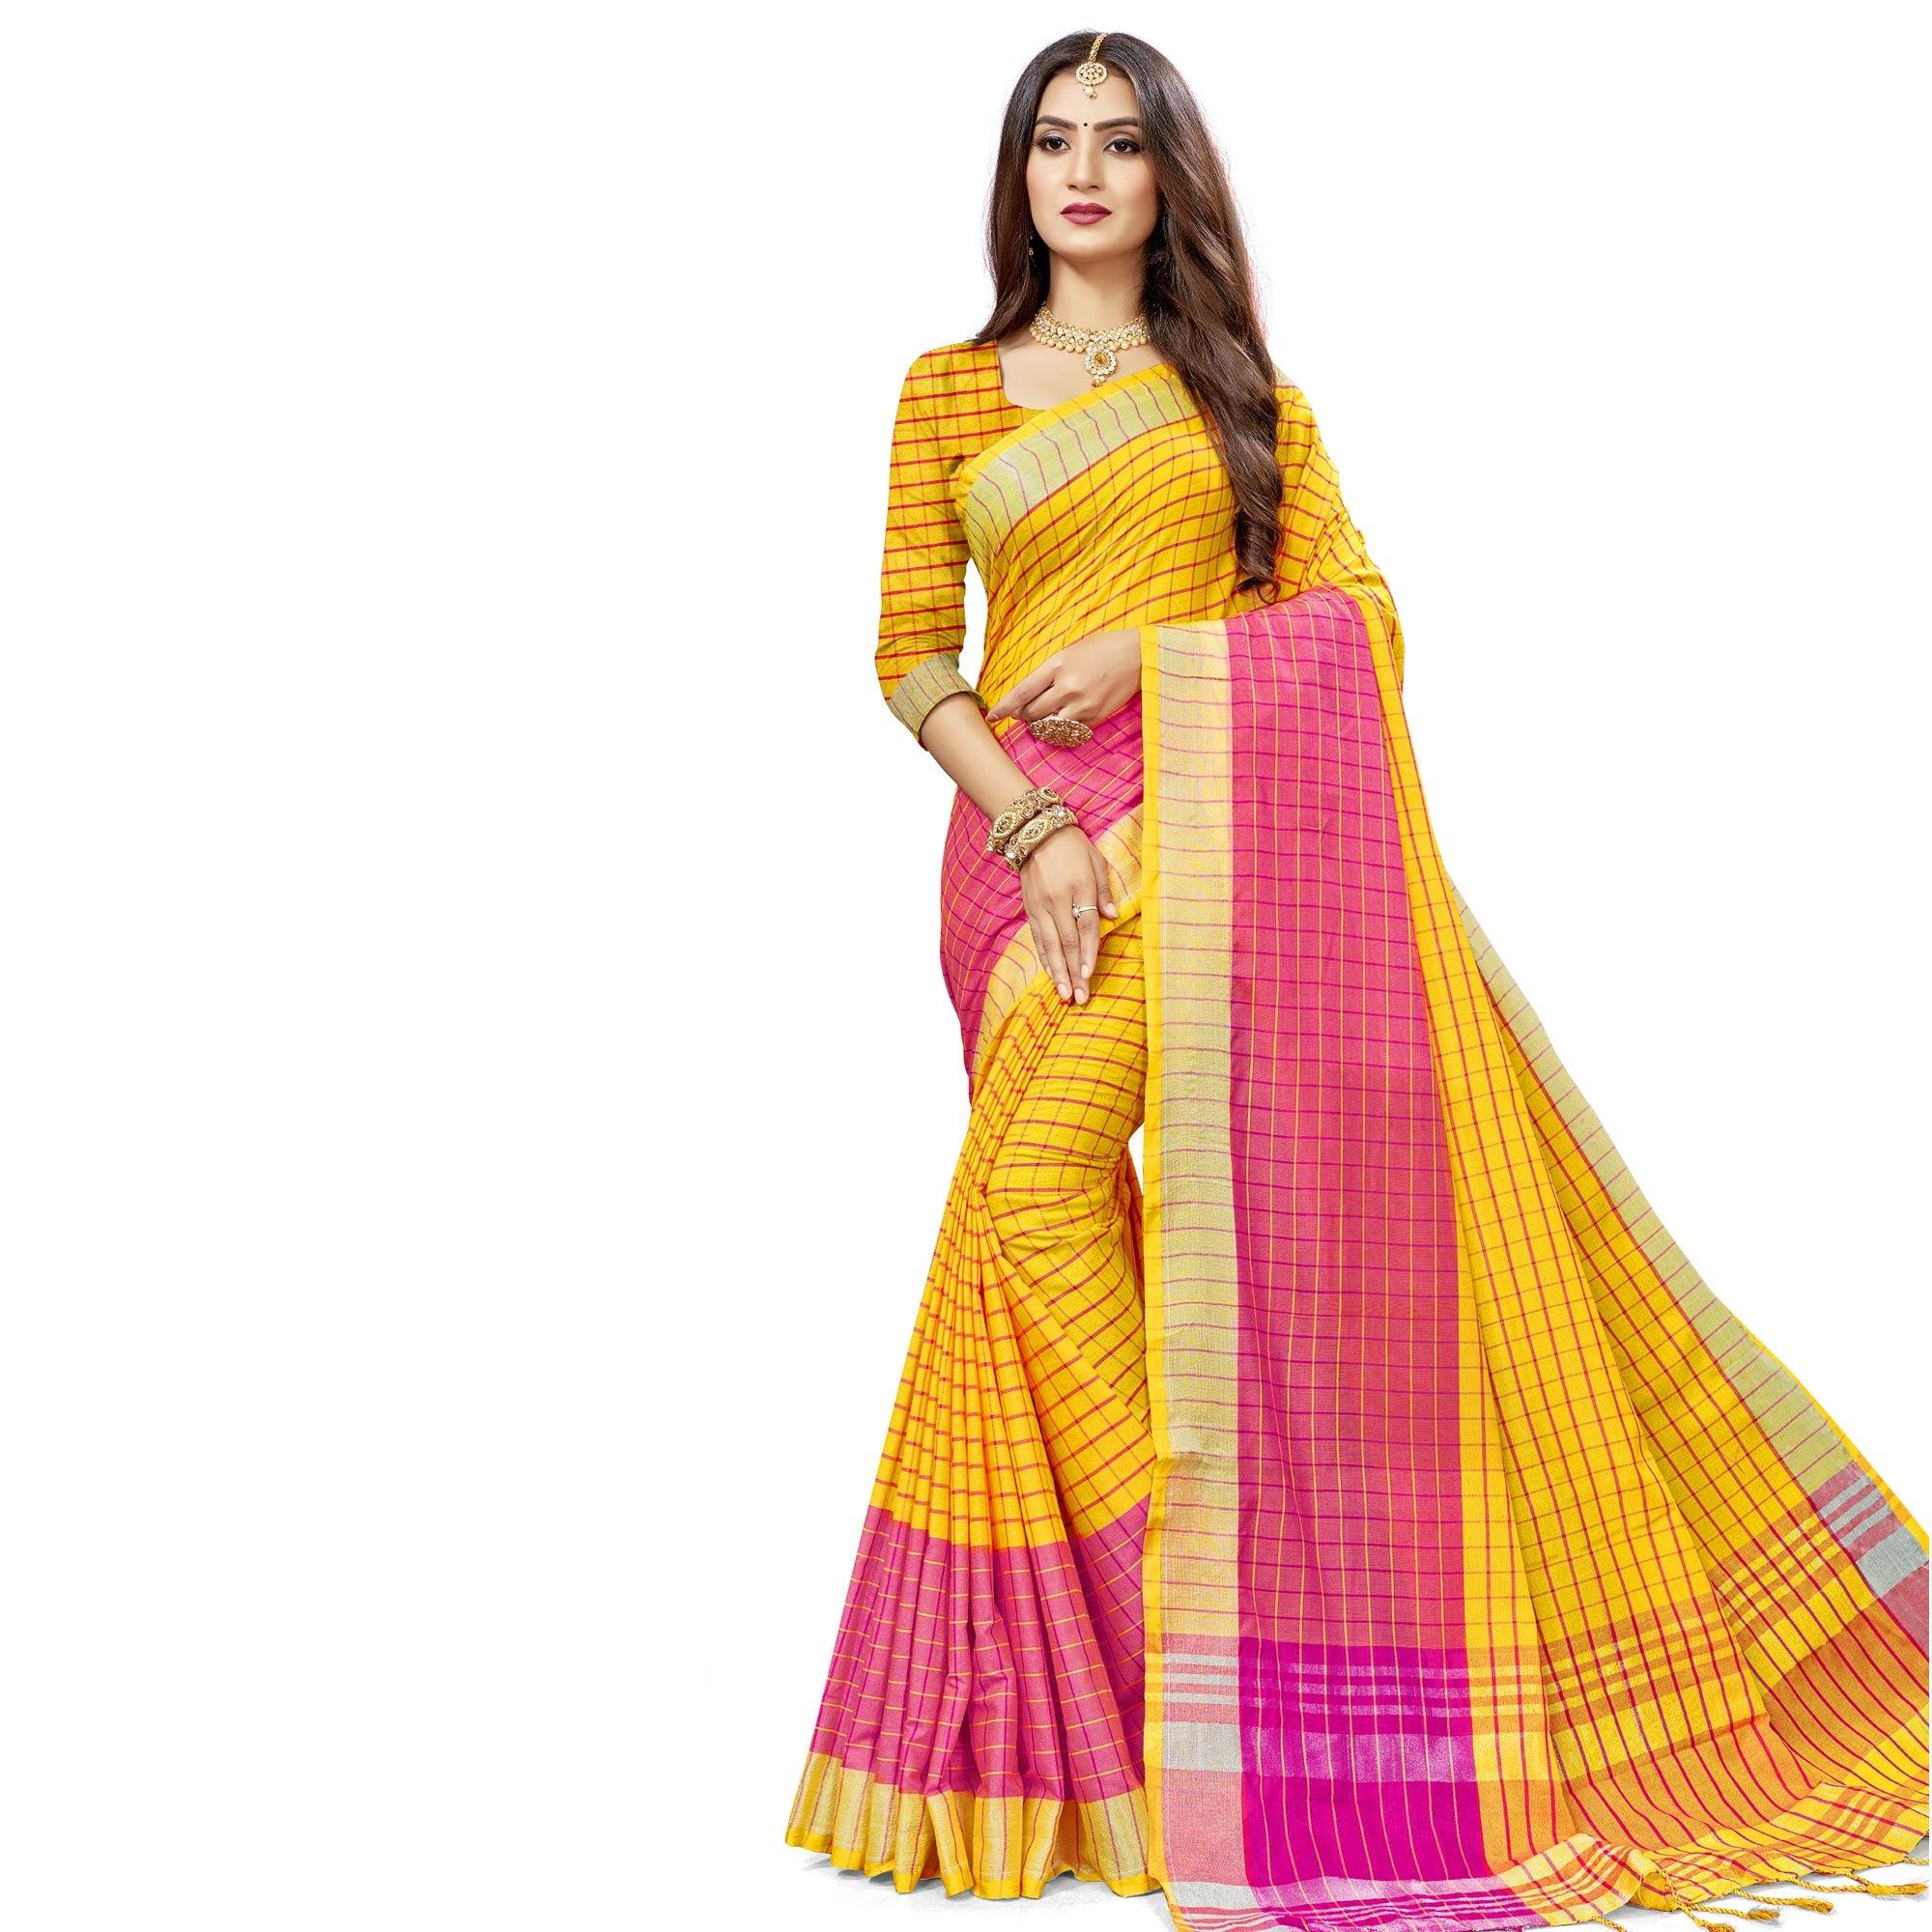 Blooming Yellow Colored Fesive Wear Checks Print Cotton Silk Saree With Tassels - Peachmode